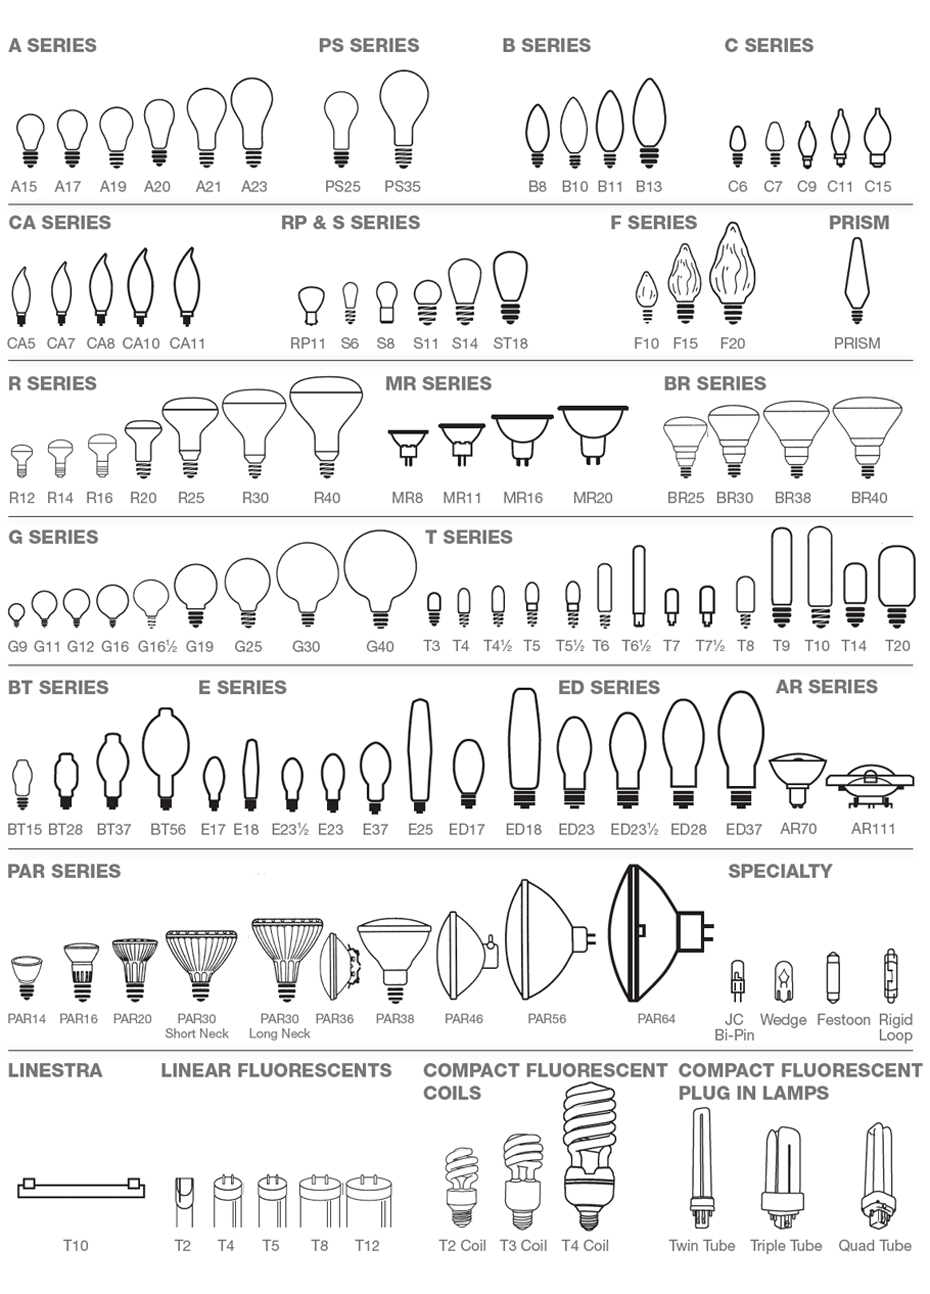 Bulb Shapes and Sizes